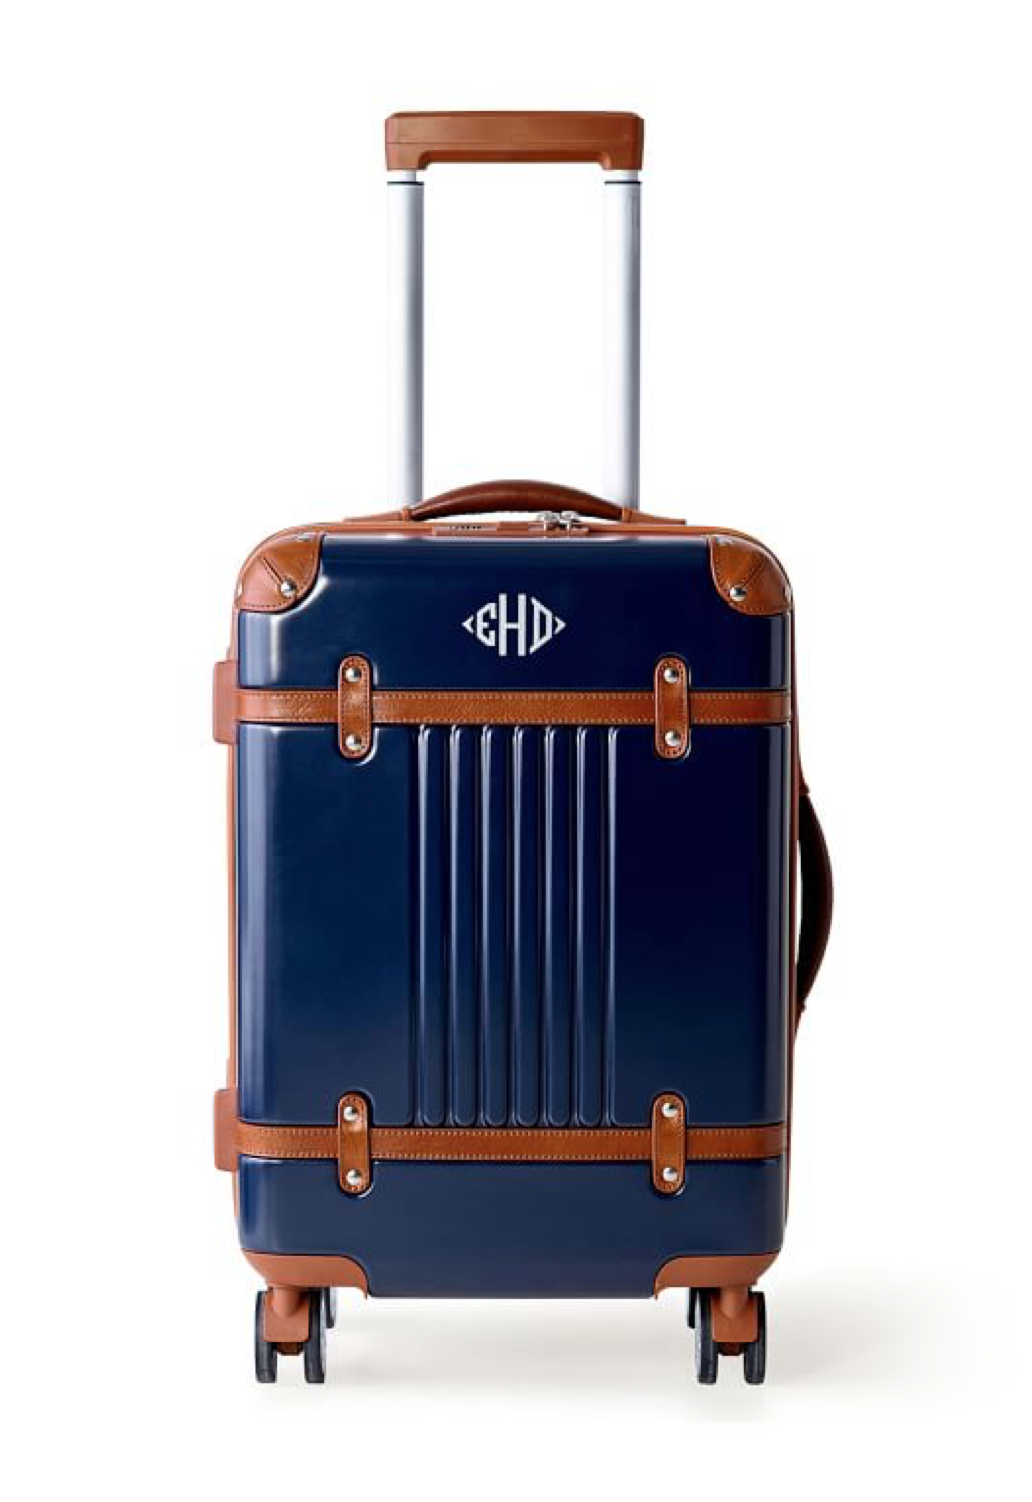 Carry On Luggage Bag